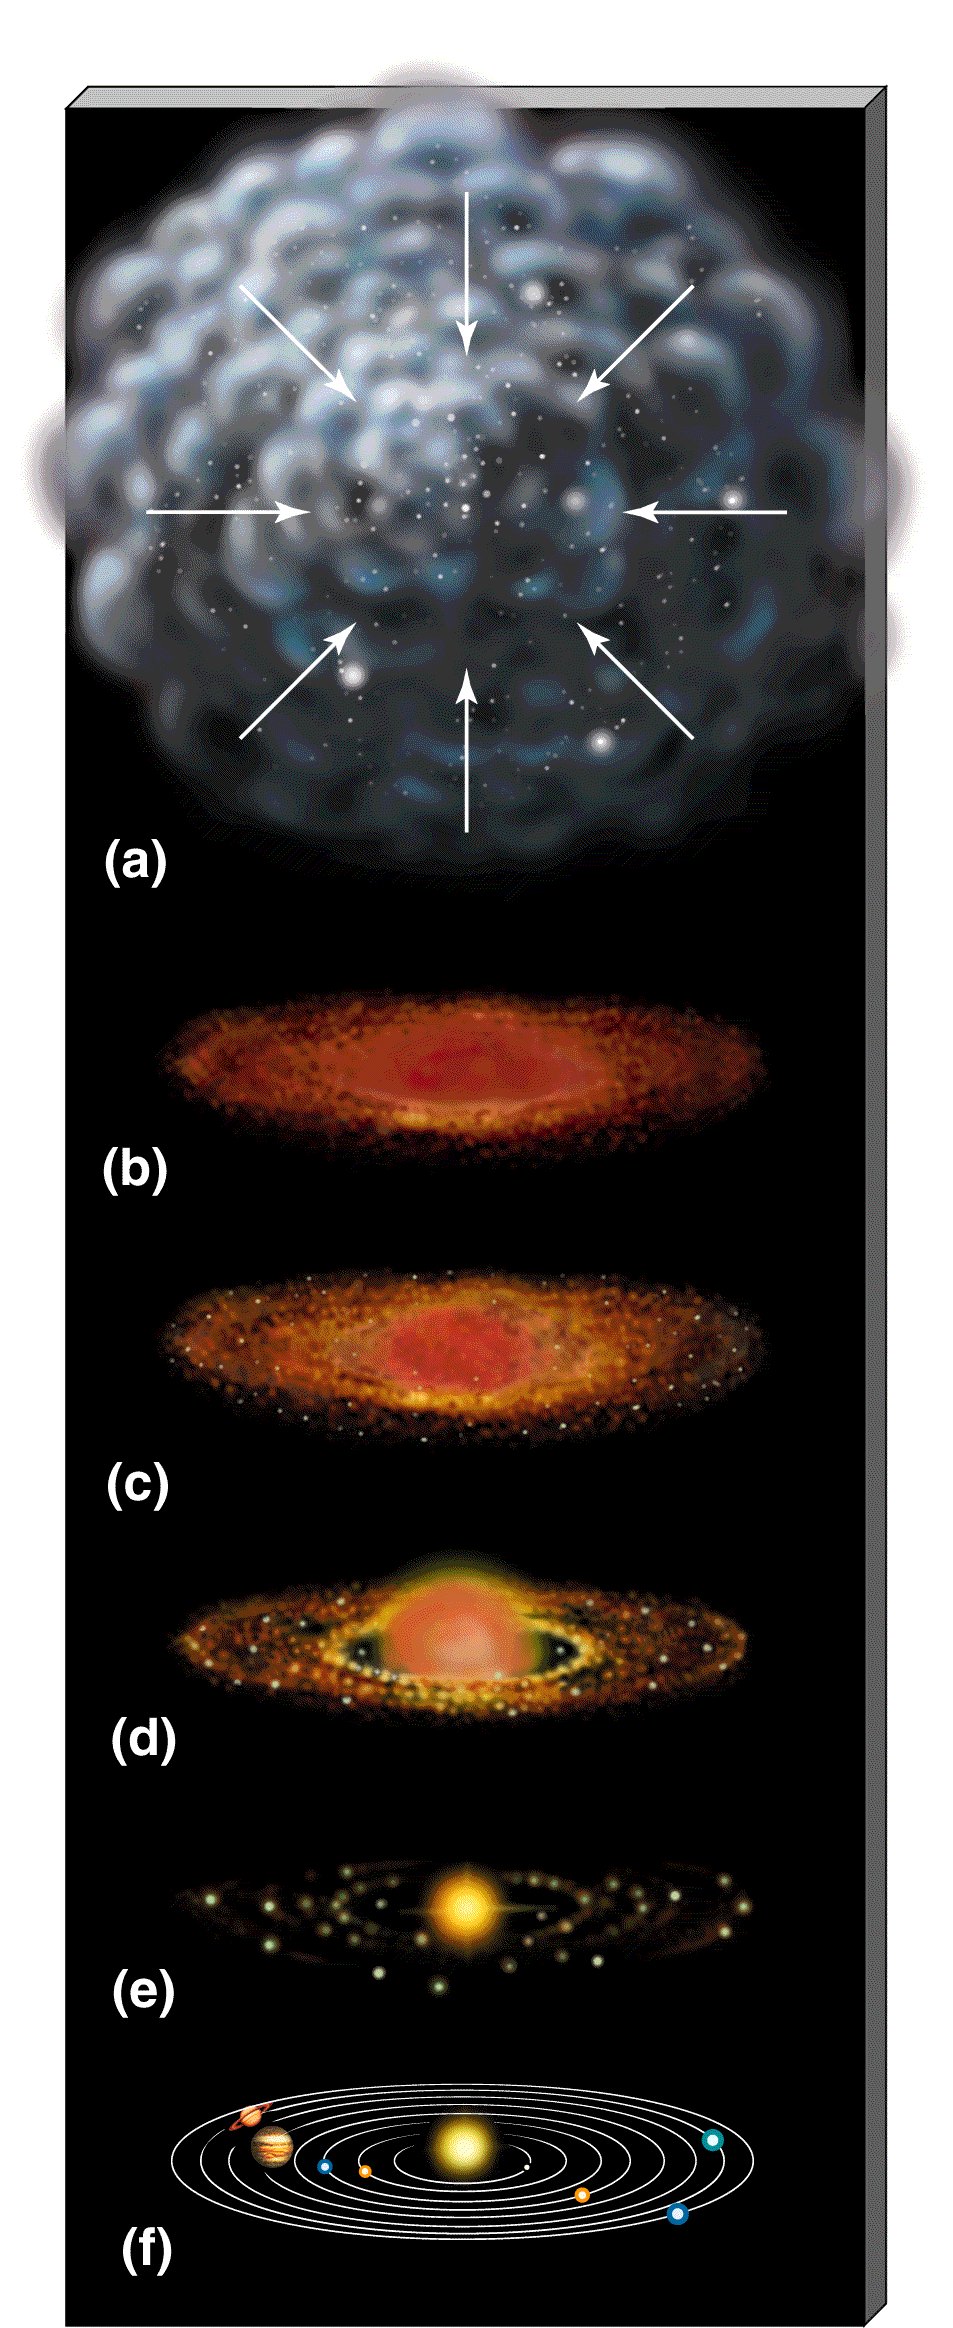 A diagram showing the process of star and planet formation. There are 6 steps in the image. The first shows the gas cloud collapsing, and the five following show the protostar forming, the protoplanetary disk forming, material clumping together to form planetesimals, protoplanets forming from those planetesimals, the rest of the gas disappating, and the resultant system (in this case, our Solar System).